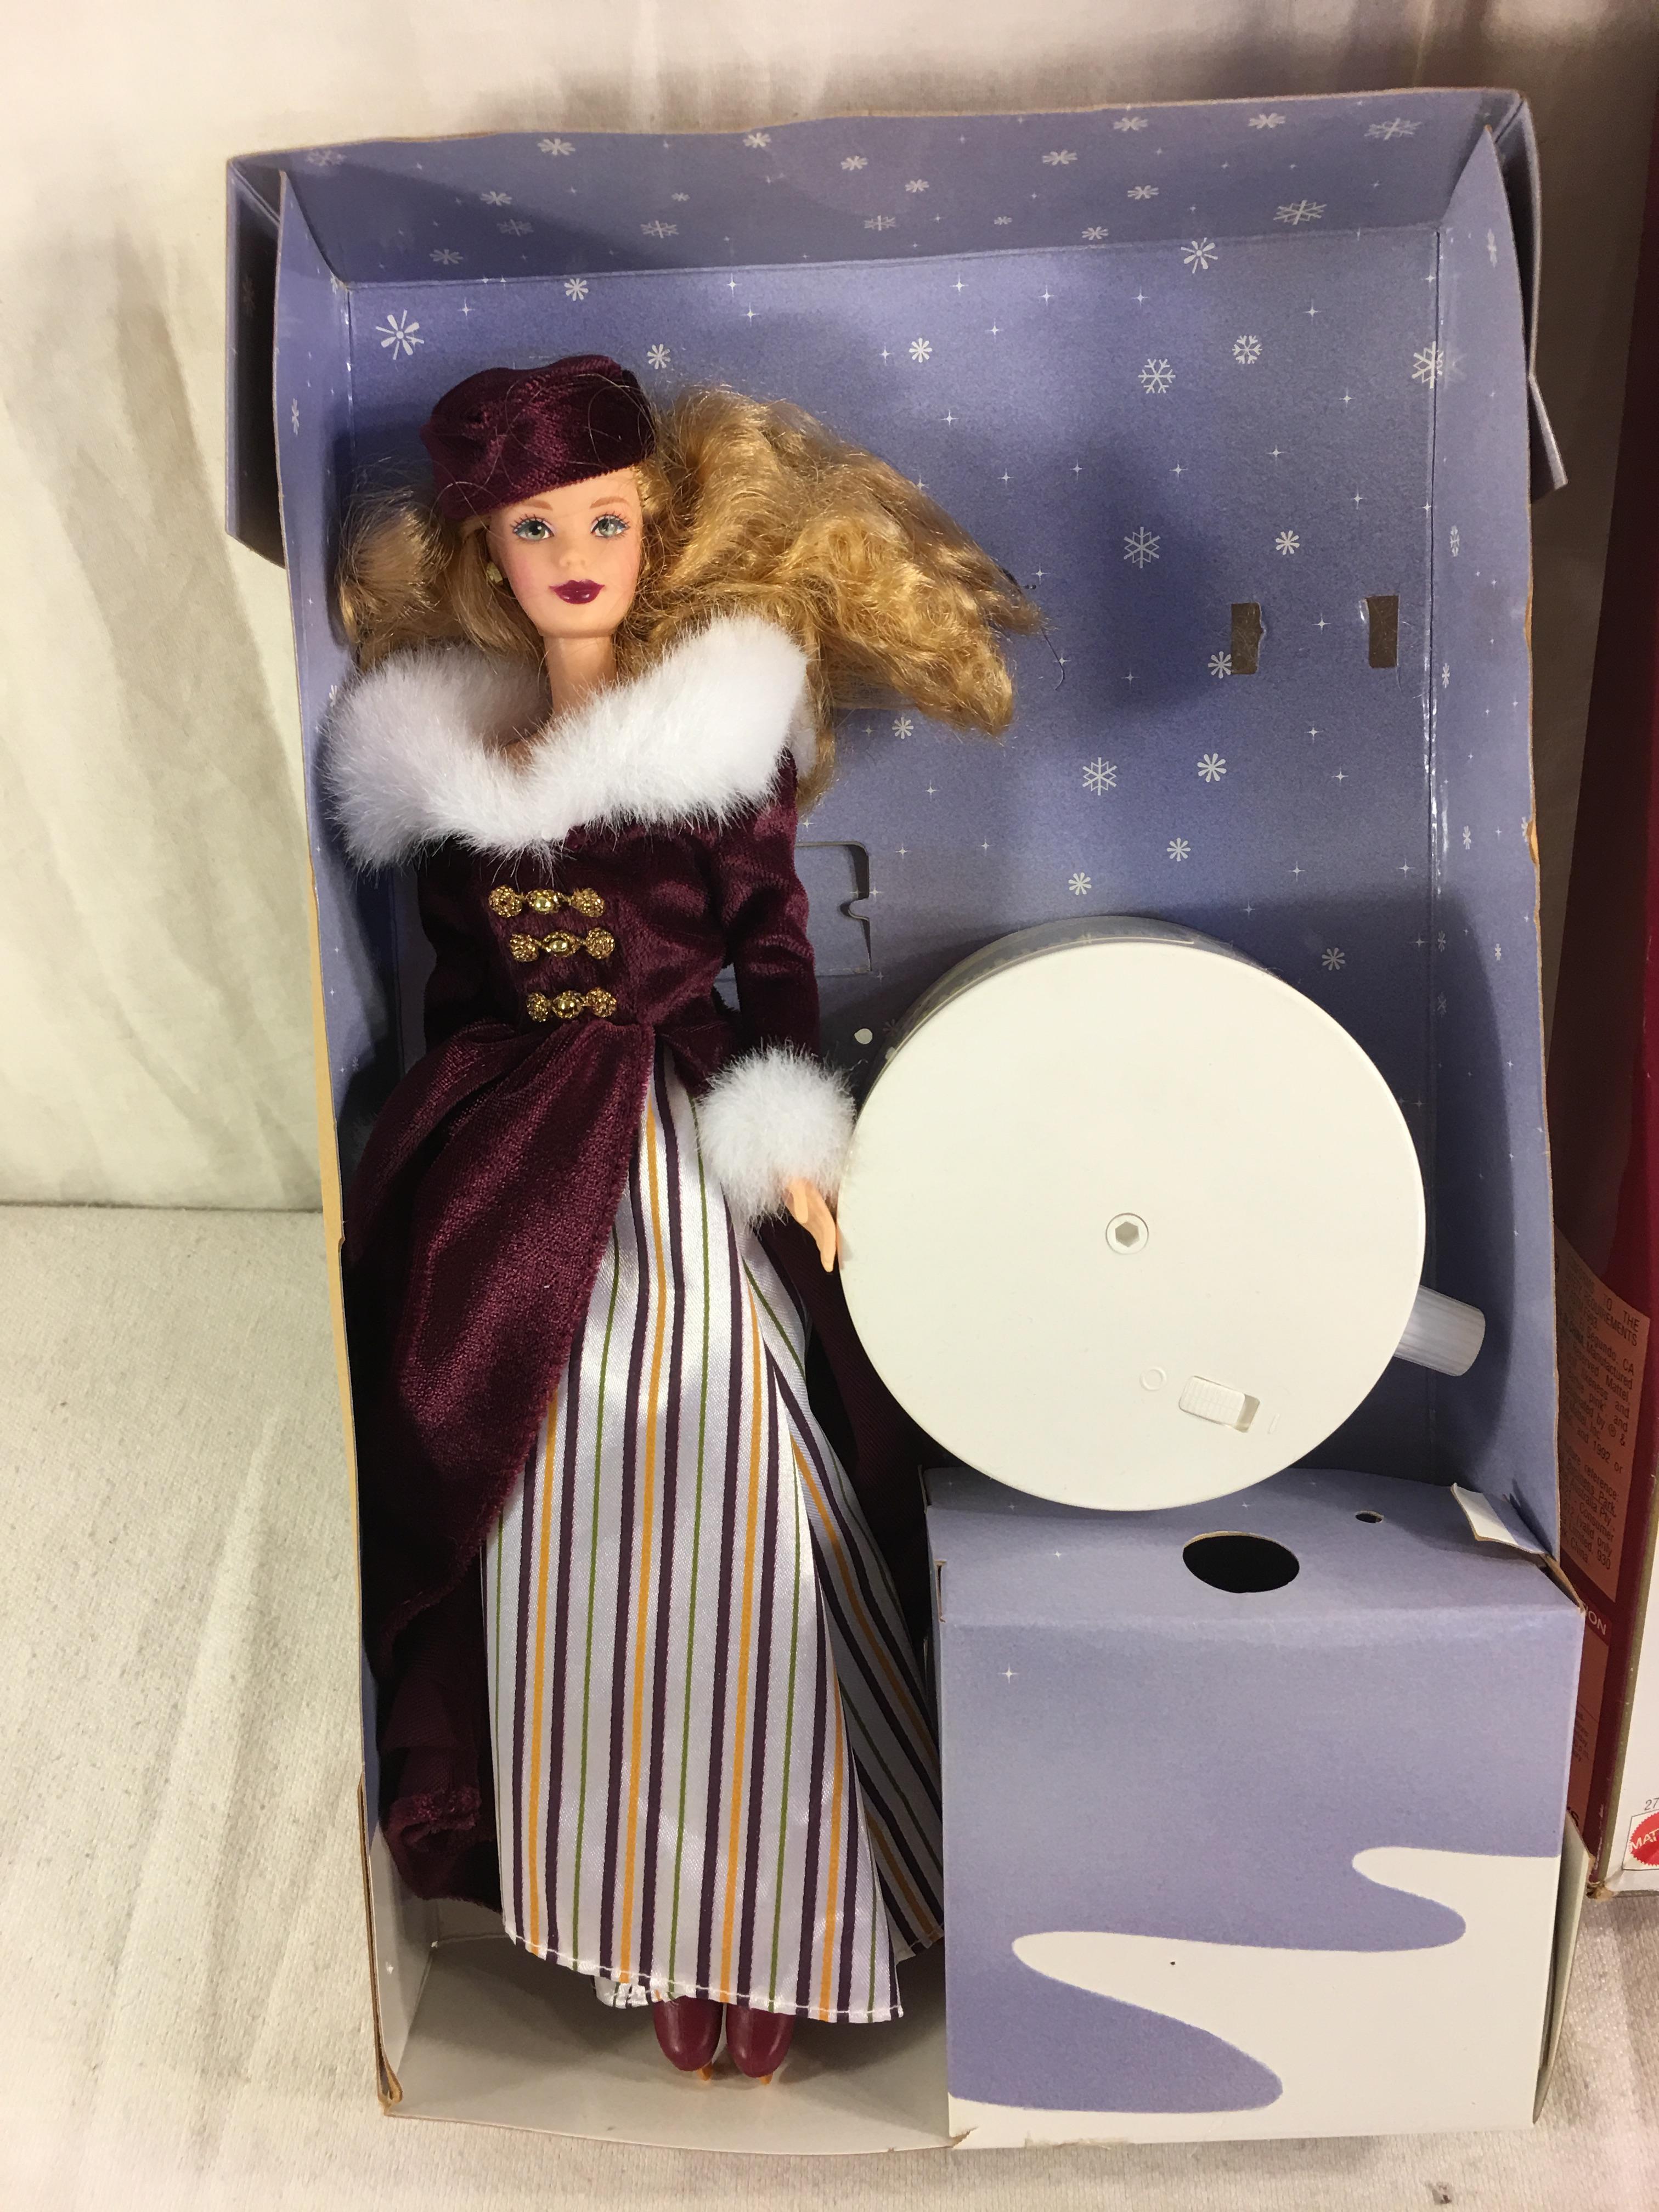 Collector Victorian Ice Skater Barbie Doll Loose in Box